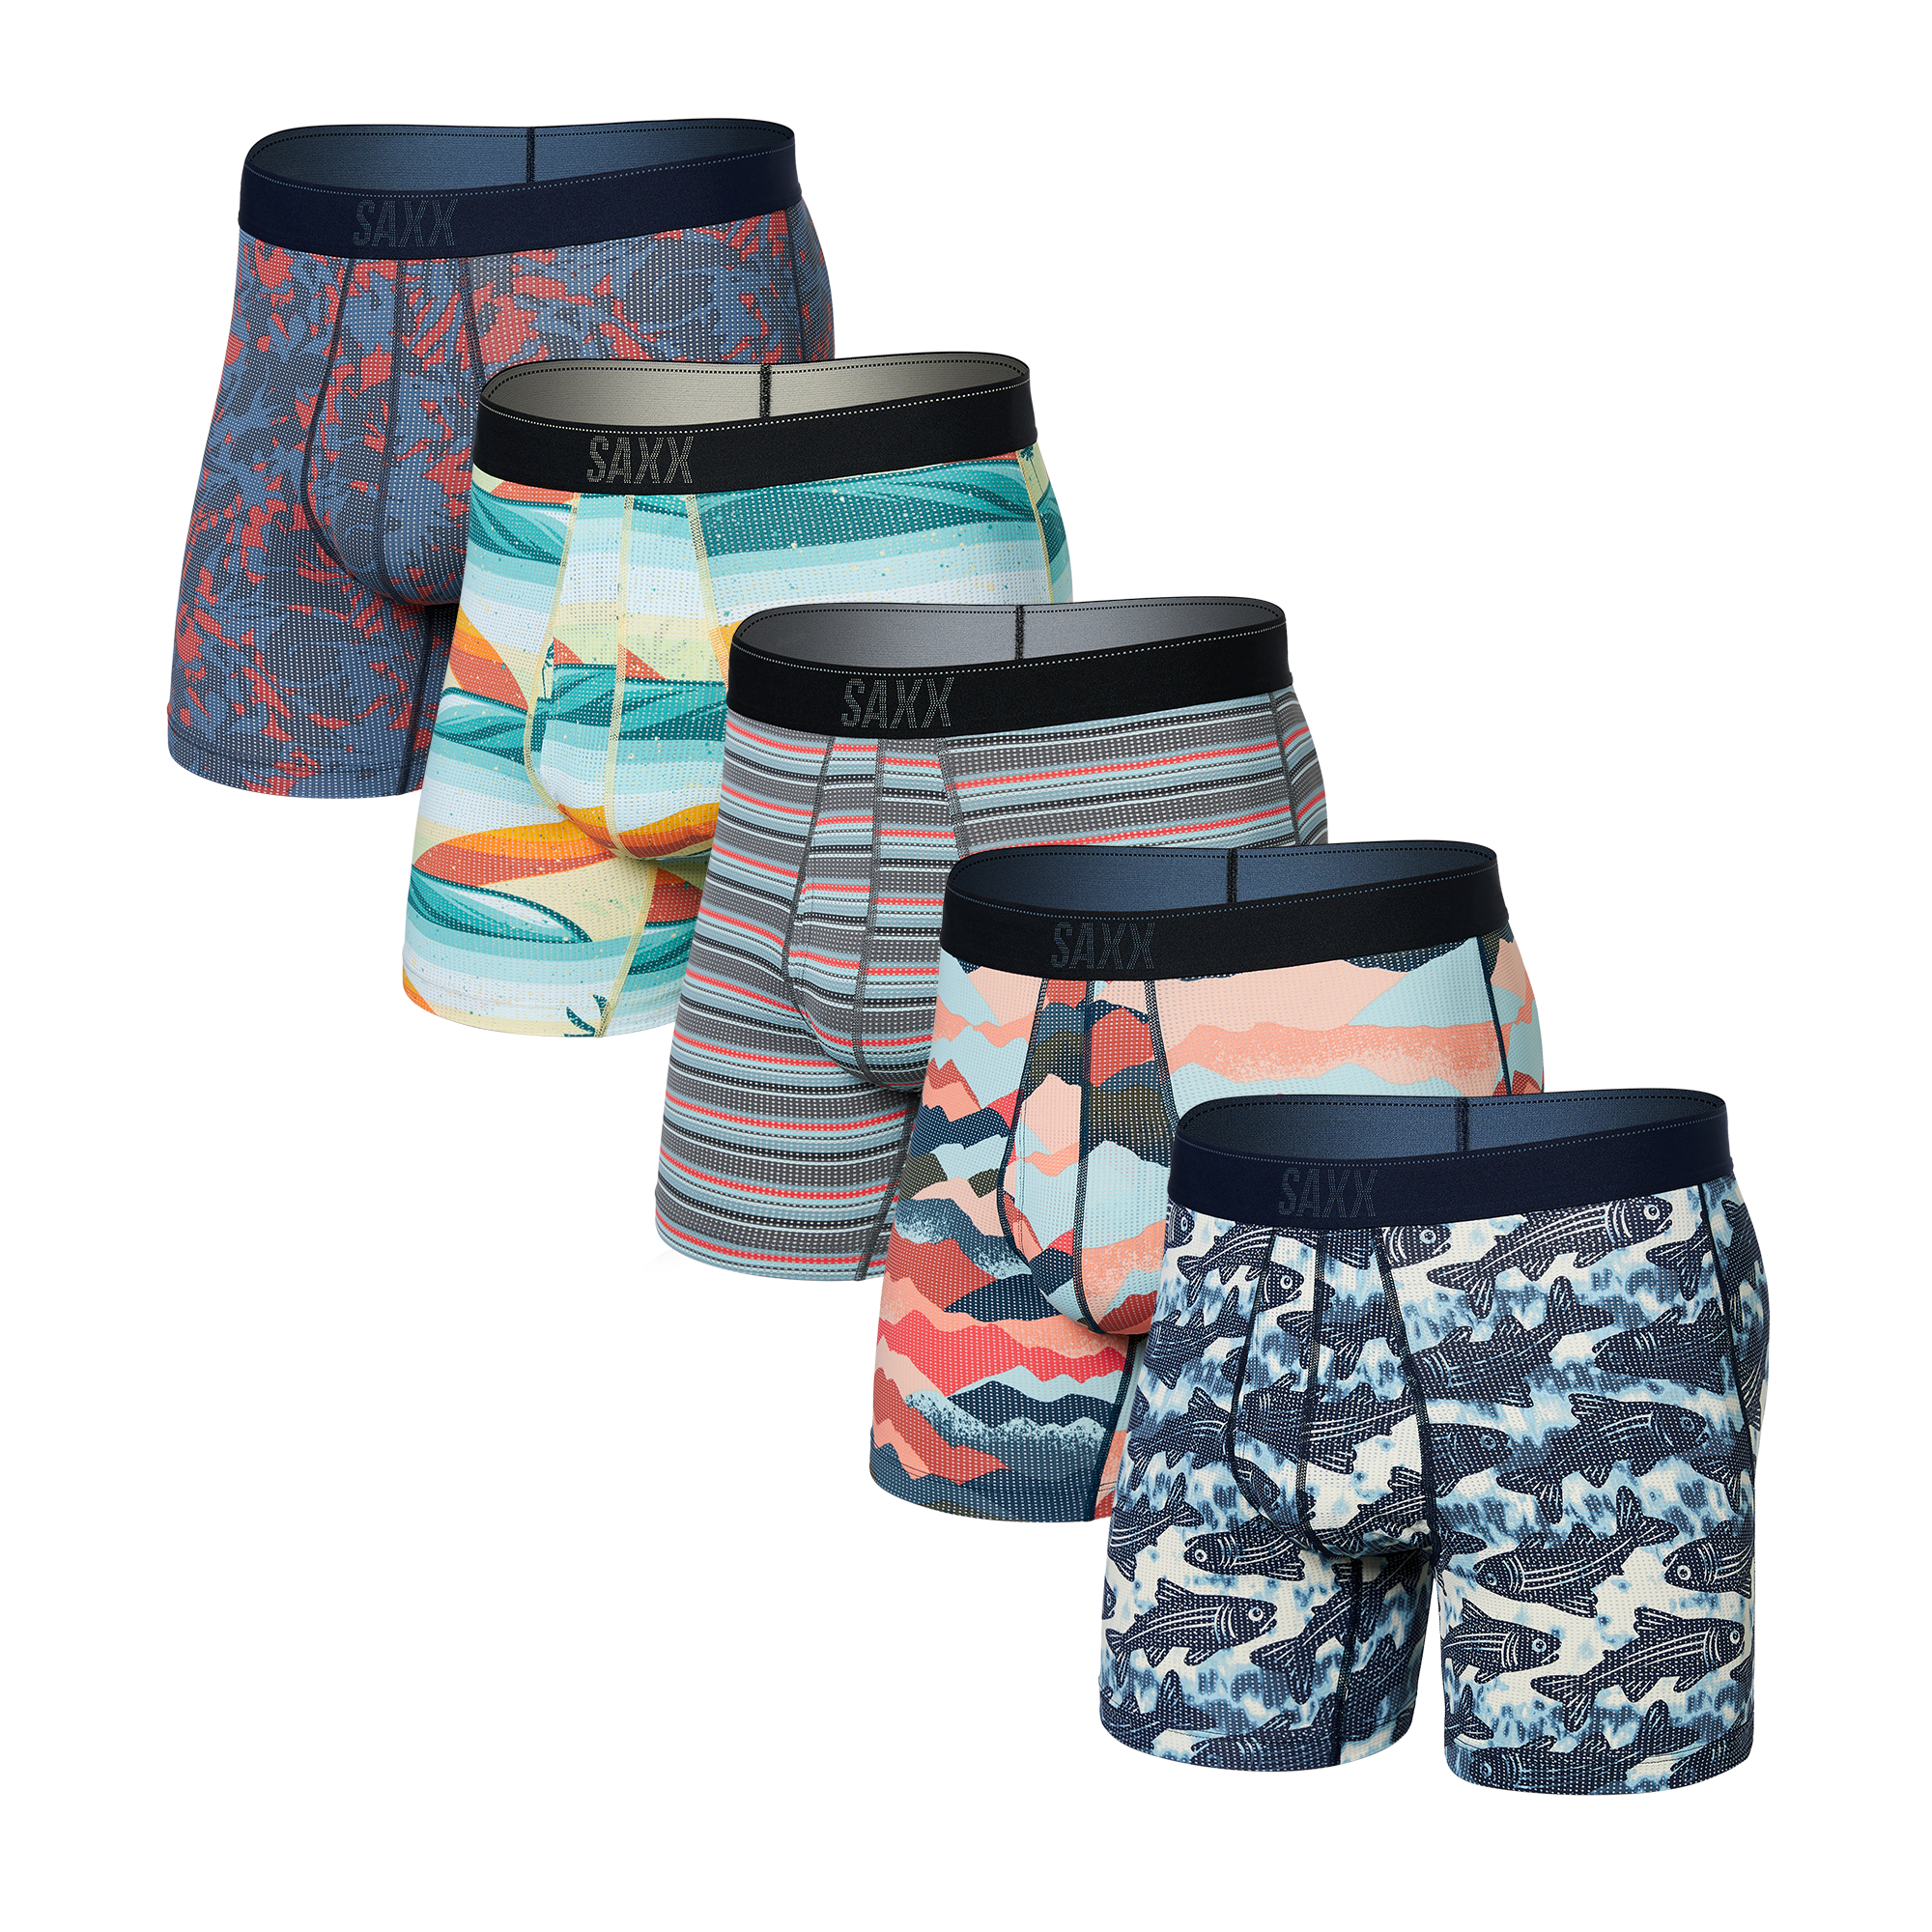 Quest Boxer Brief 5-Pack in Assorted Prints